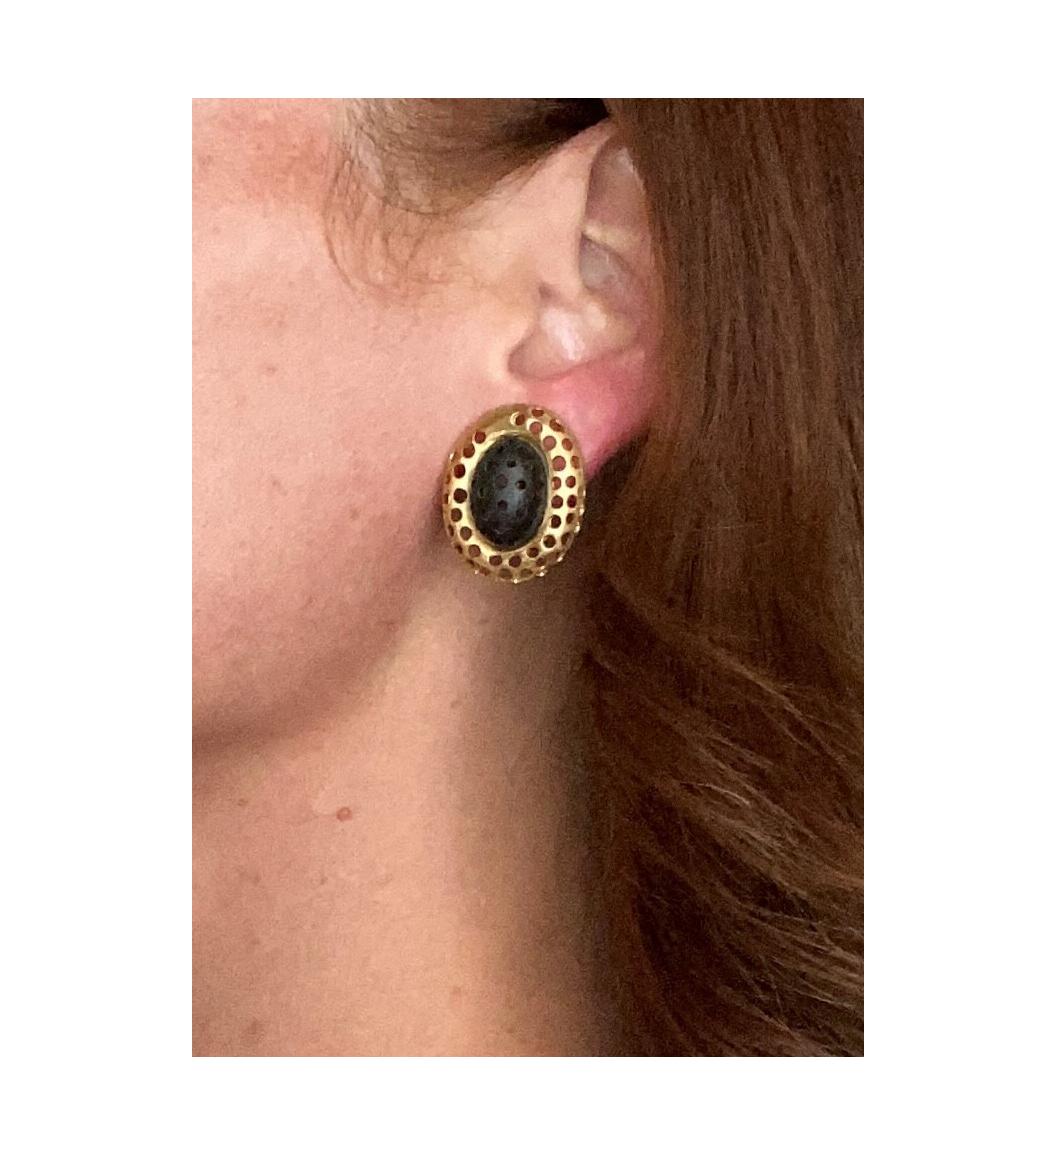 Geometric pair of earrings designed by Angela Cummings.

Rare oval shaped pair created at the cummings studio in New York city, back in the 1984. They was crafted with a mismatched pattern of perforations in solid 18 karats yellow gold. Mounted.